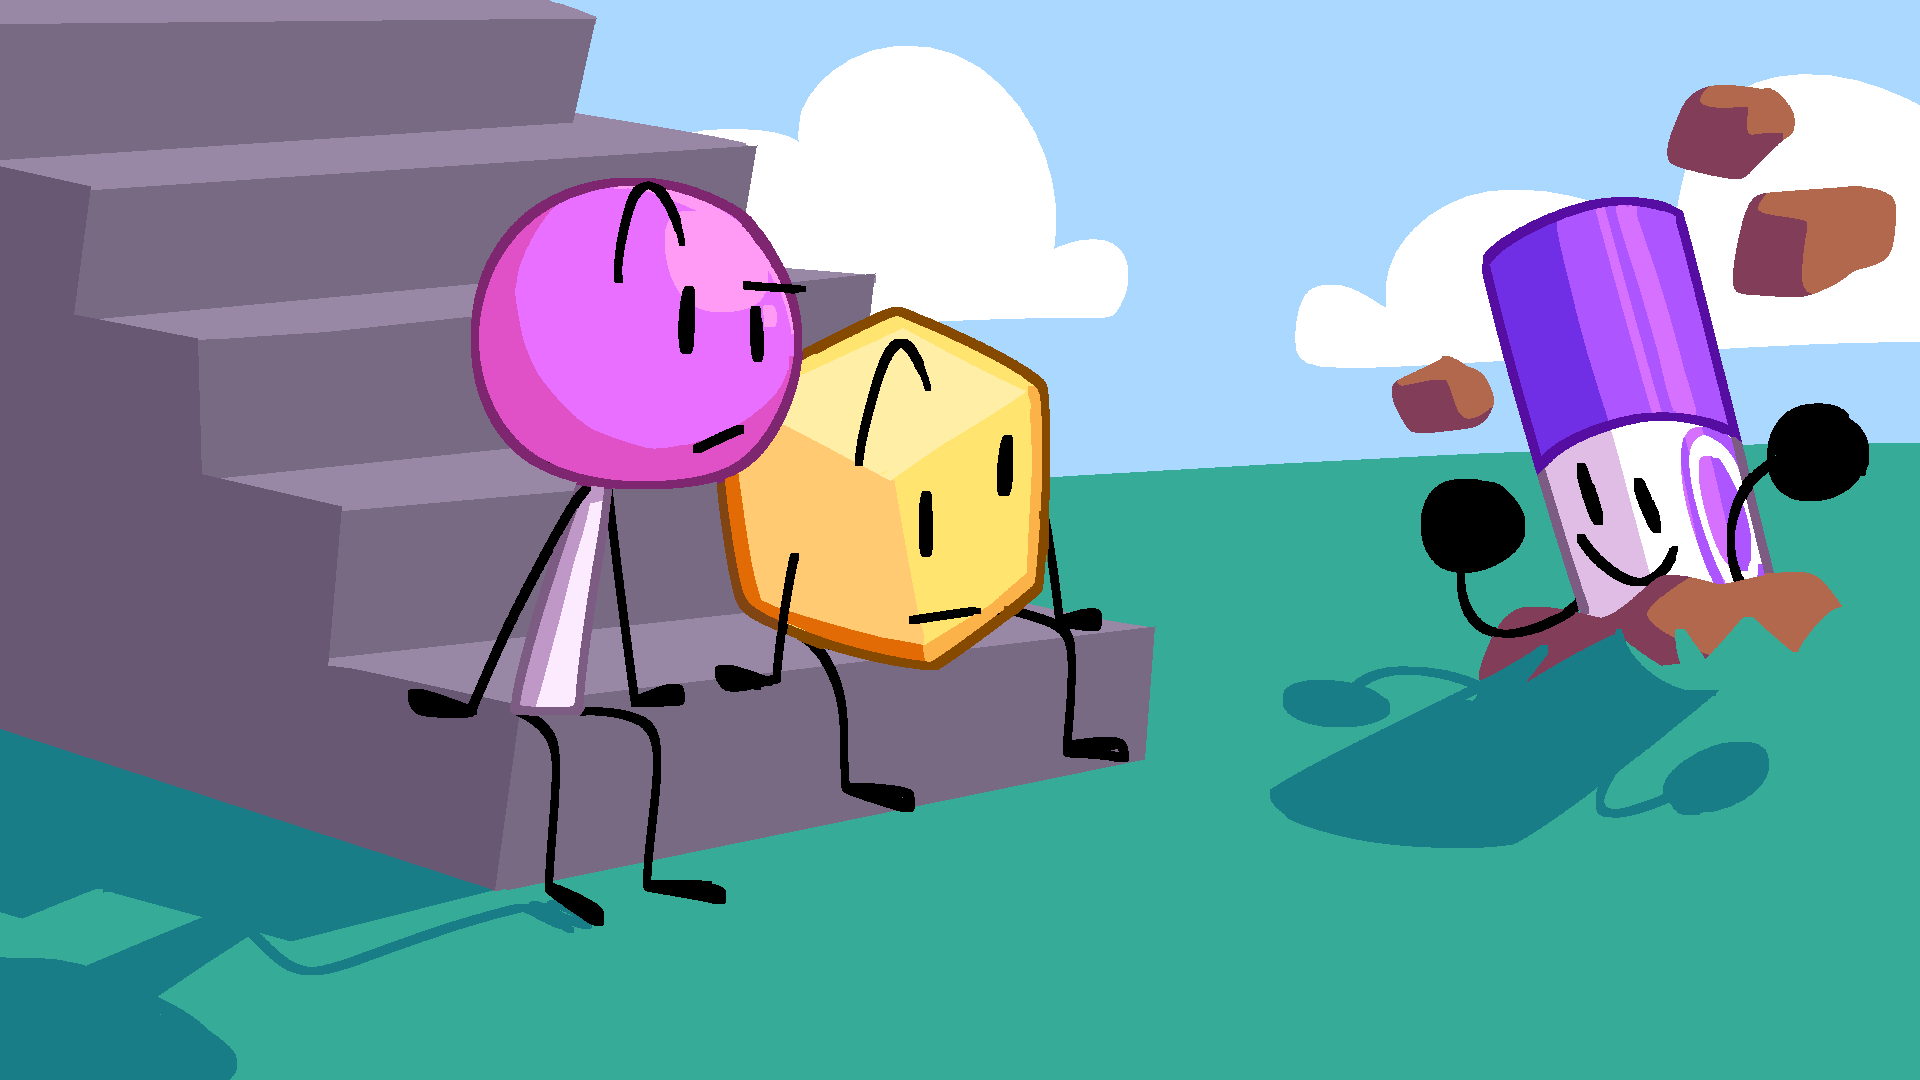 Drawing 3 BFB TPOT Characters Everyday Until I Run Out ( Day 17: Lollipop, Loser, Marker )